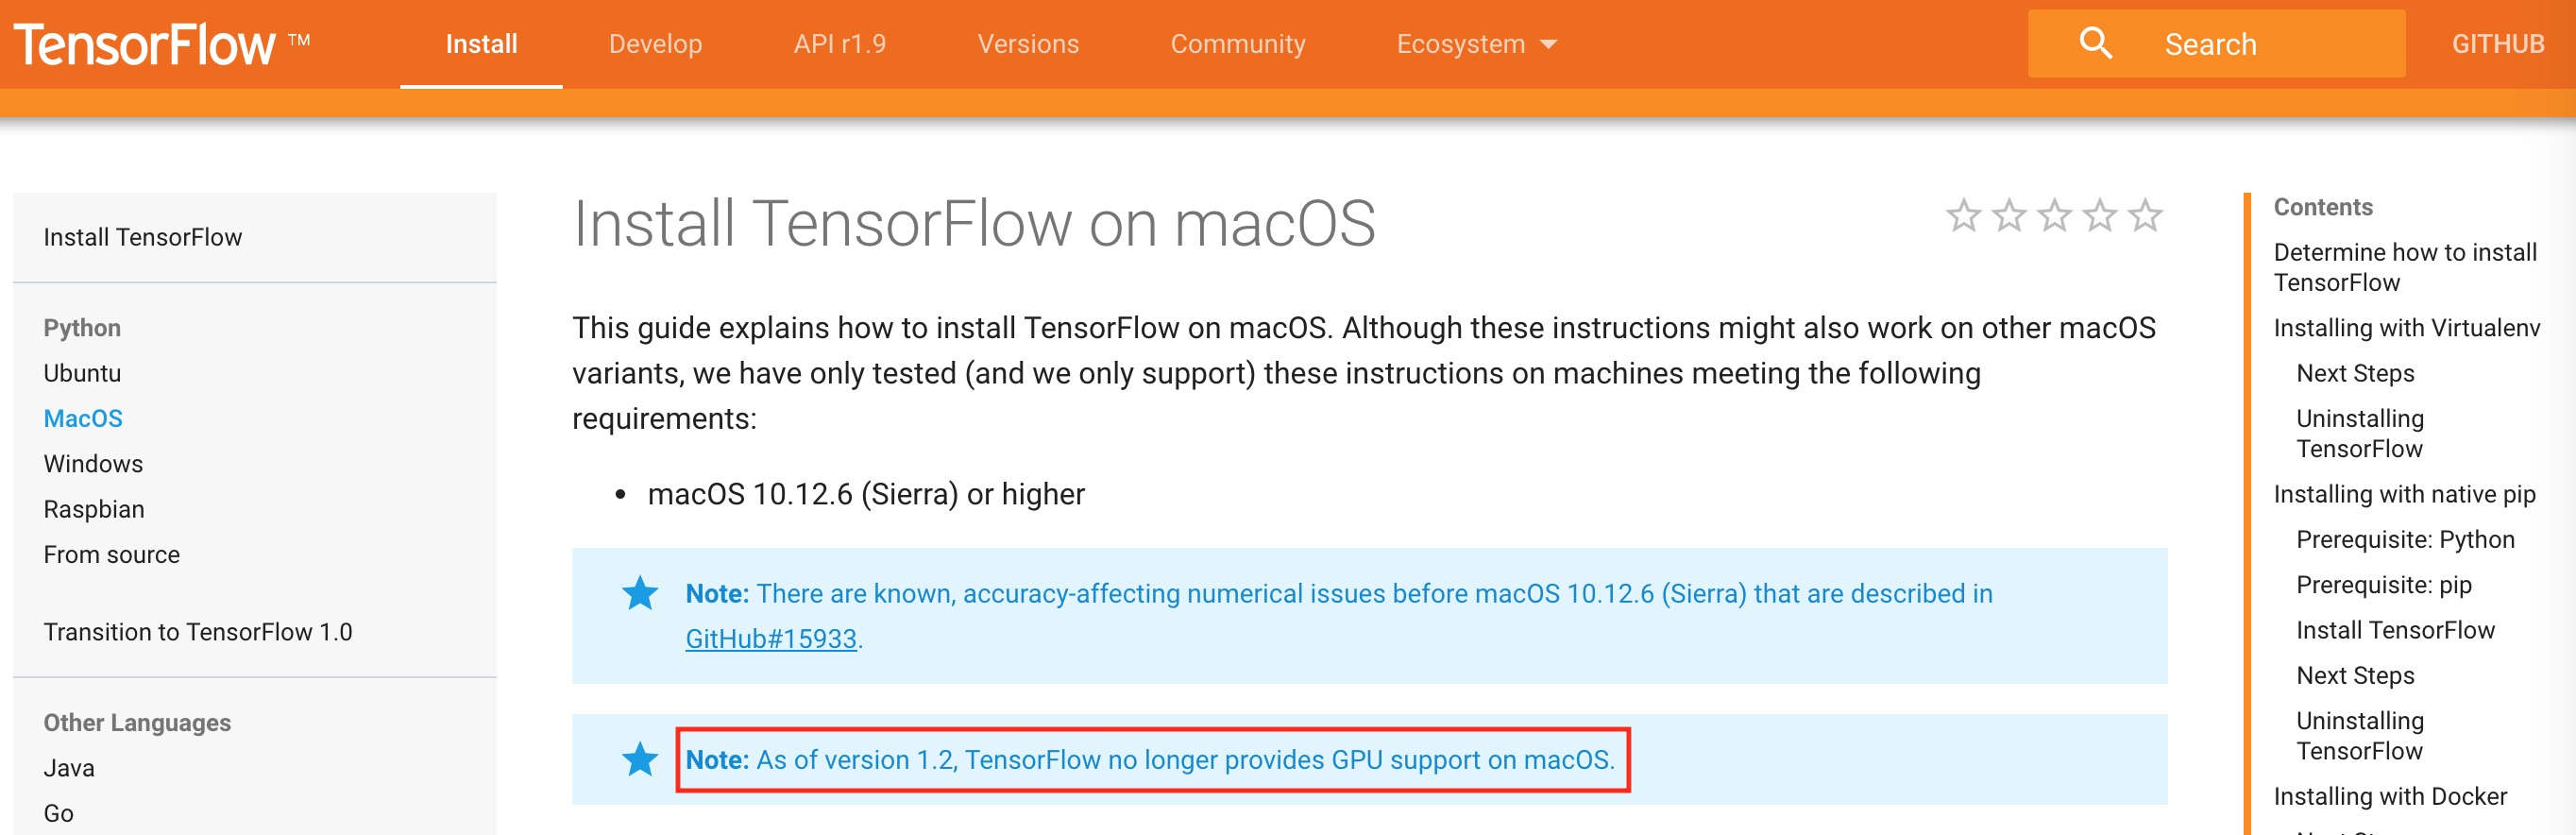 tensor flow not support gpu on macos